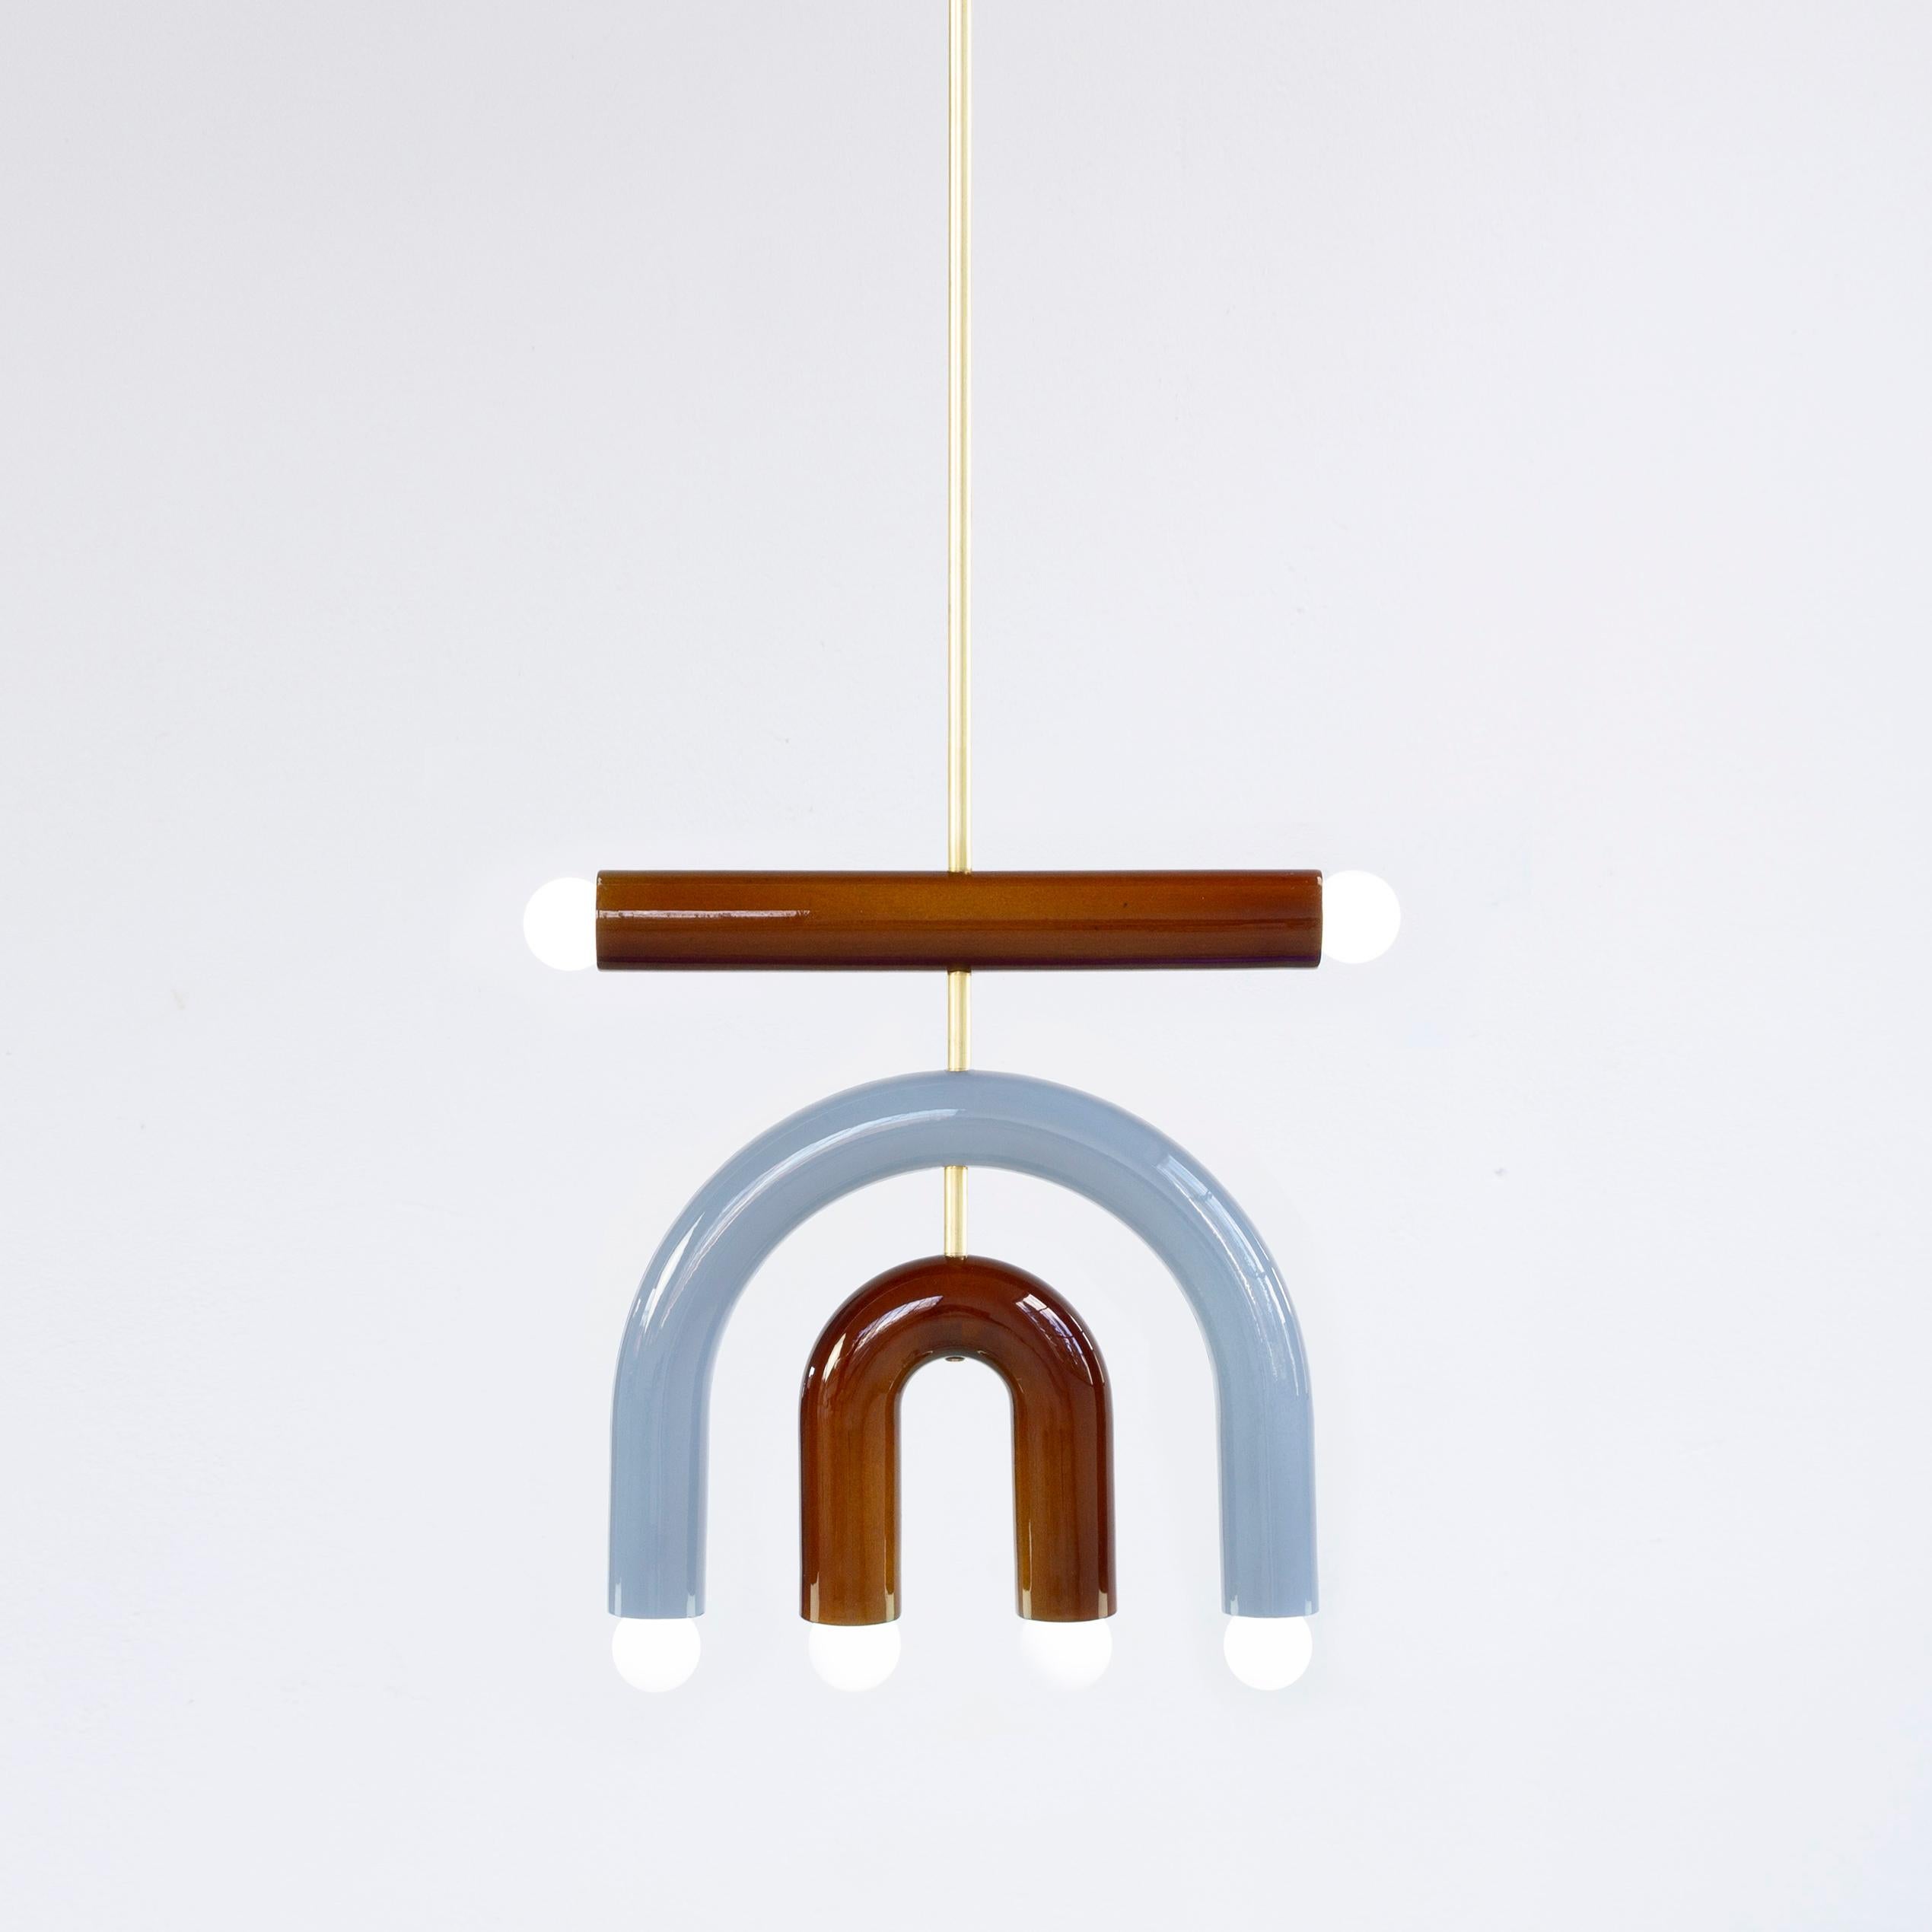 TRN D1 pendant lamp V by Pani Jurek
Dimensions: D 5 x W 35 x H 38 cm 
Material: Hand glazed ceramic and brass.
Available in other colors.
Lamps from the TRN collection hang on a metal tube, not on a cable. This allows the lamp to be mounted in a